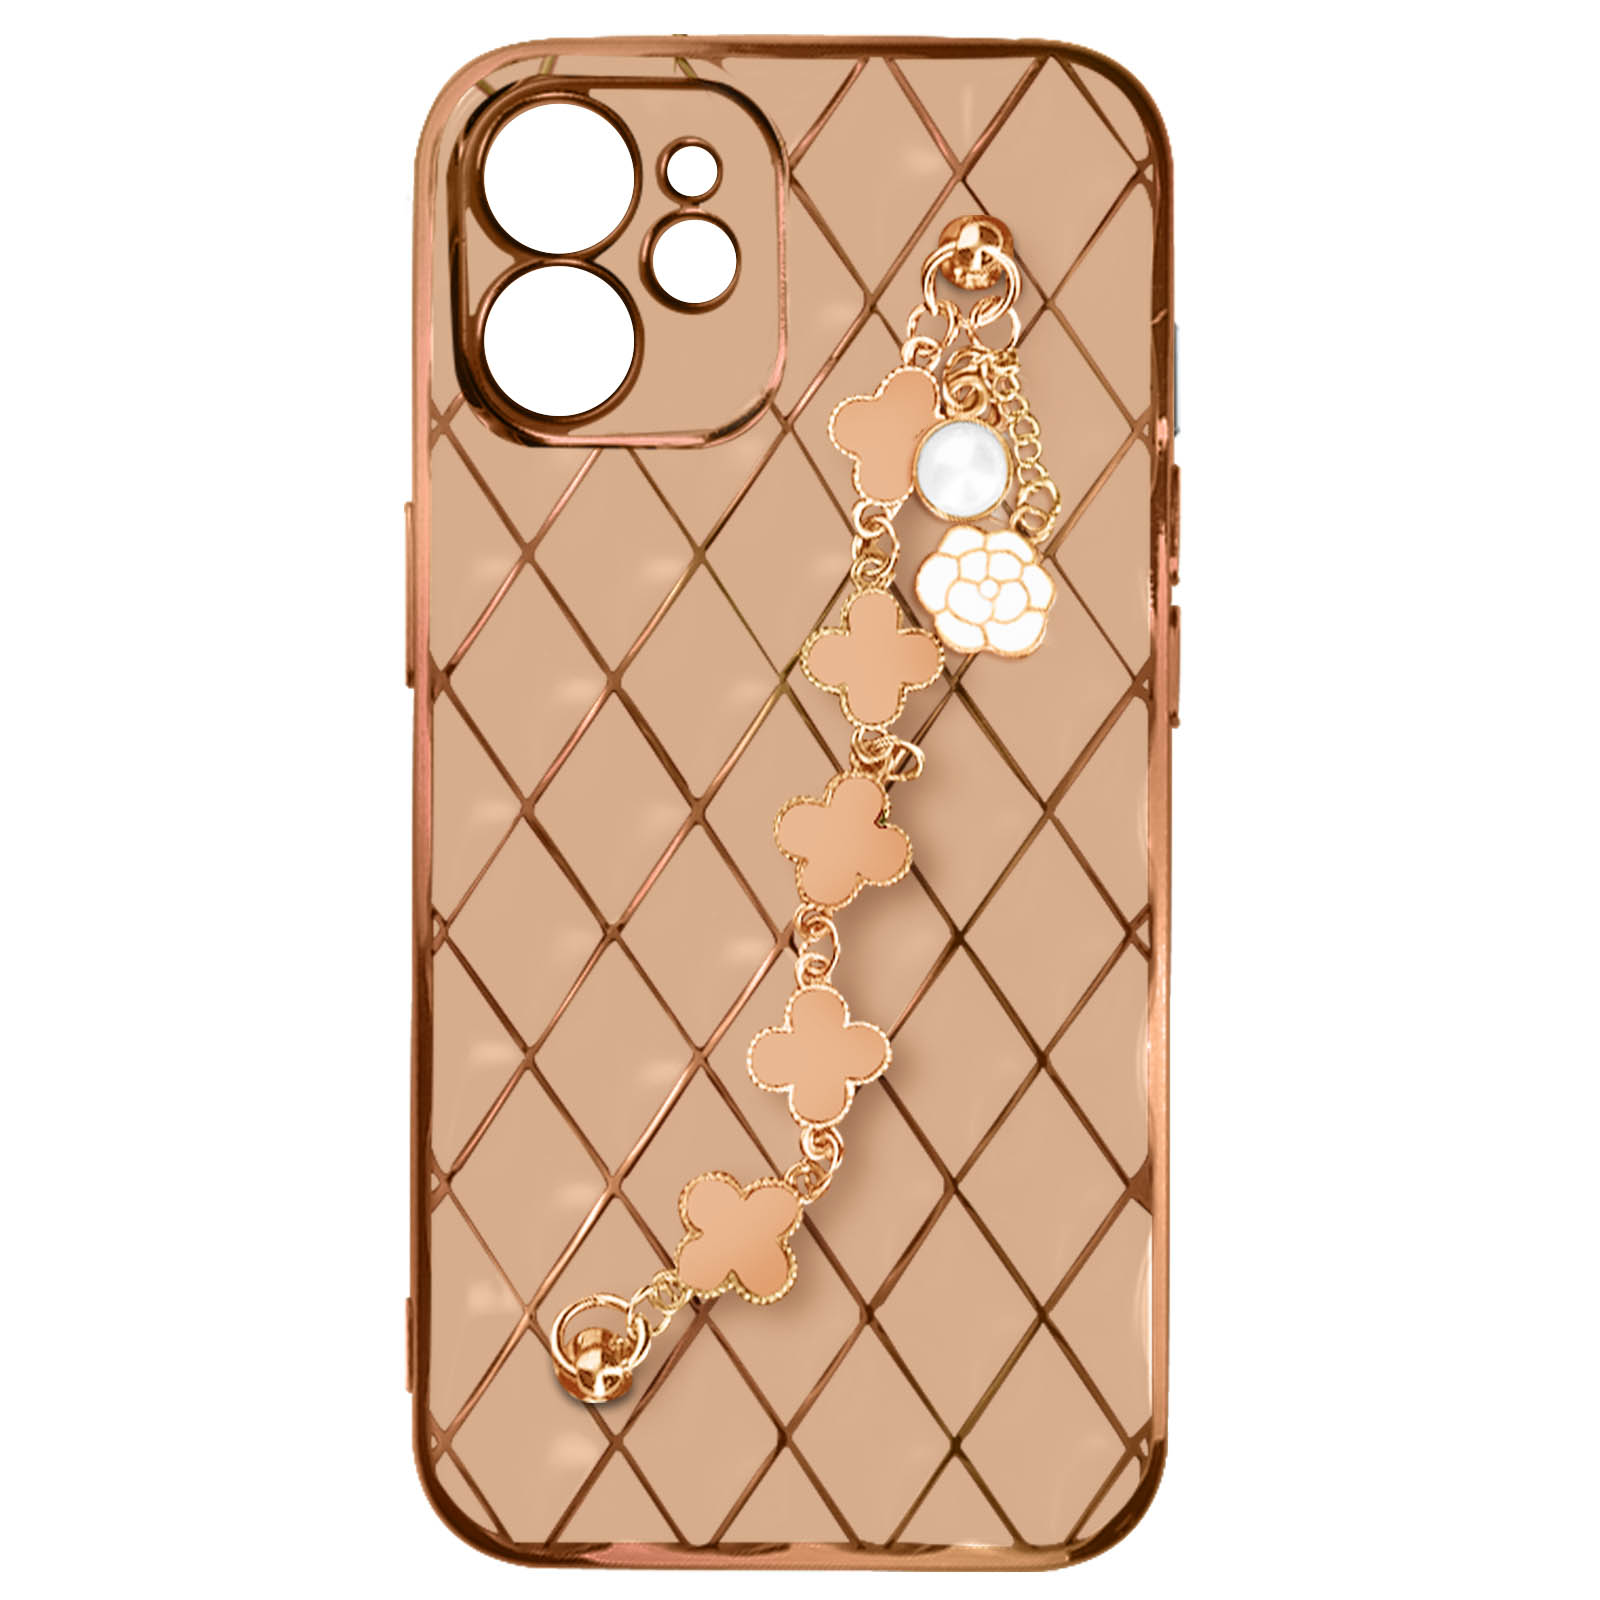 Series, Rosegold AVIZAR 12, Trend iPhone Apple, Backcover,